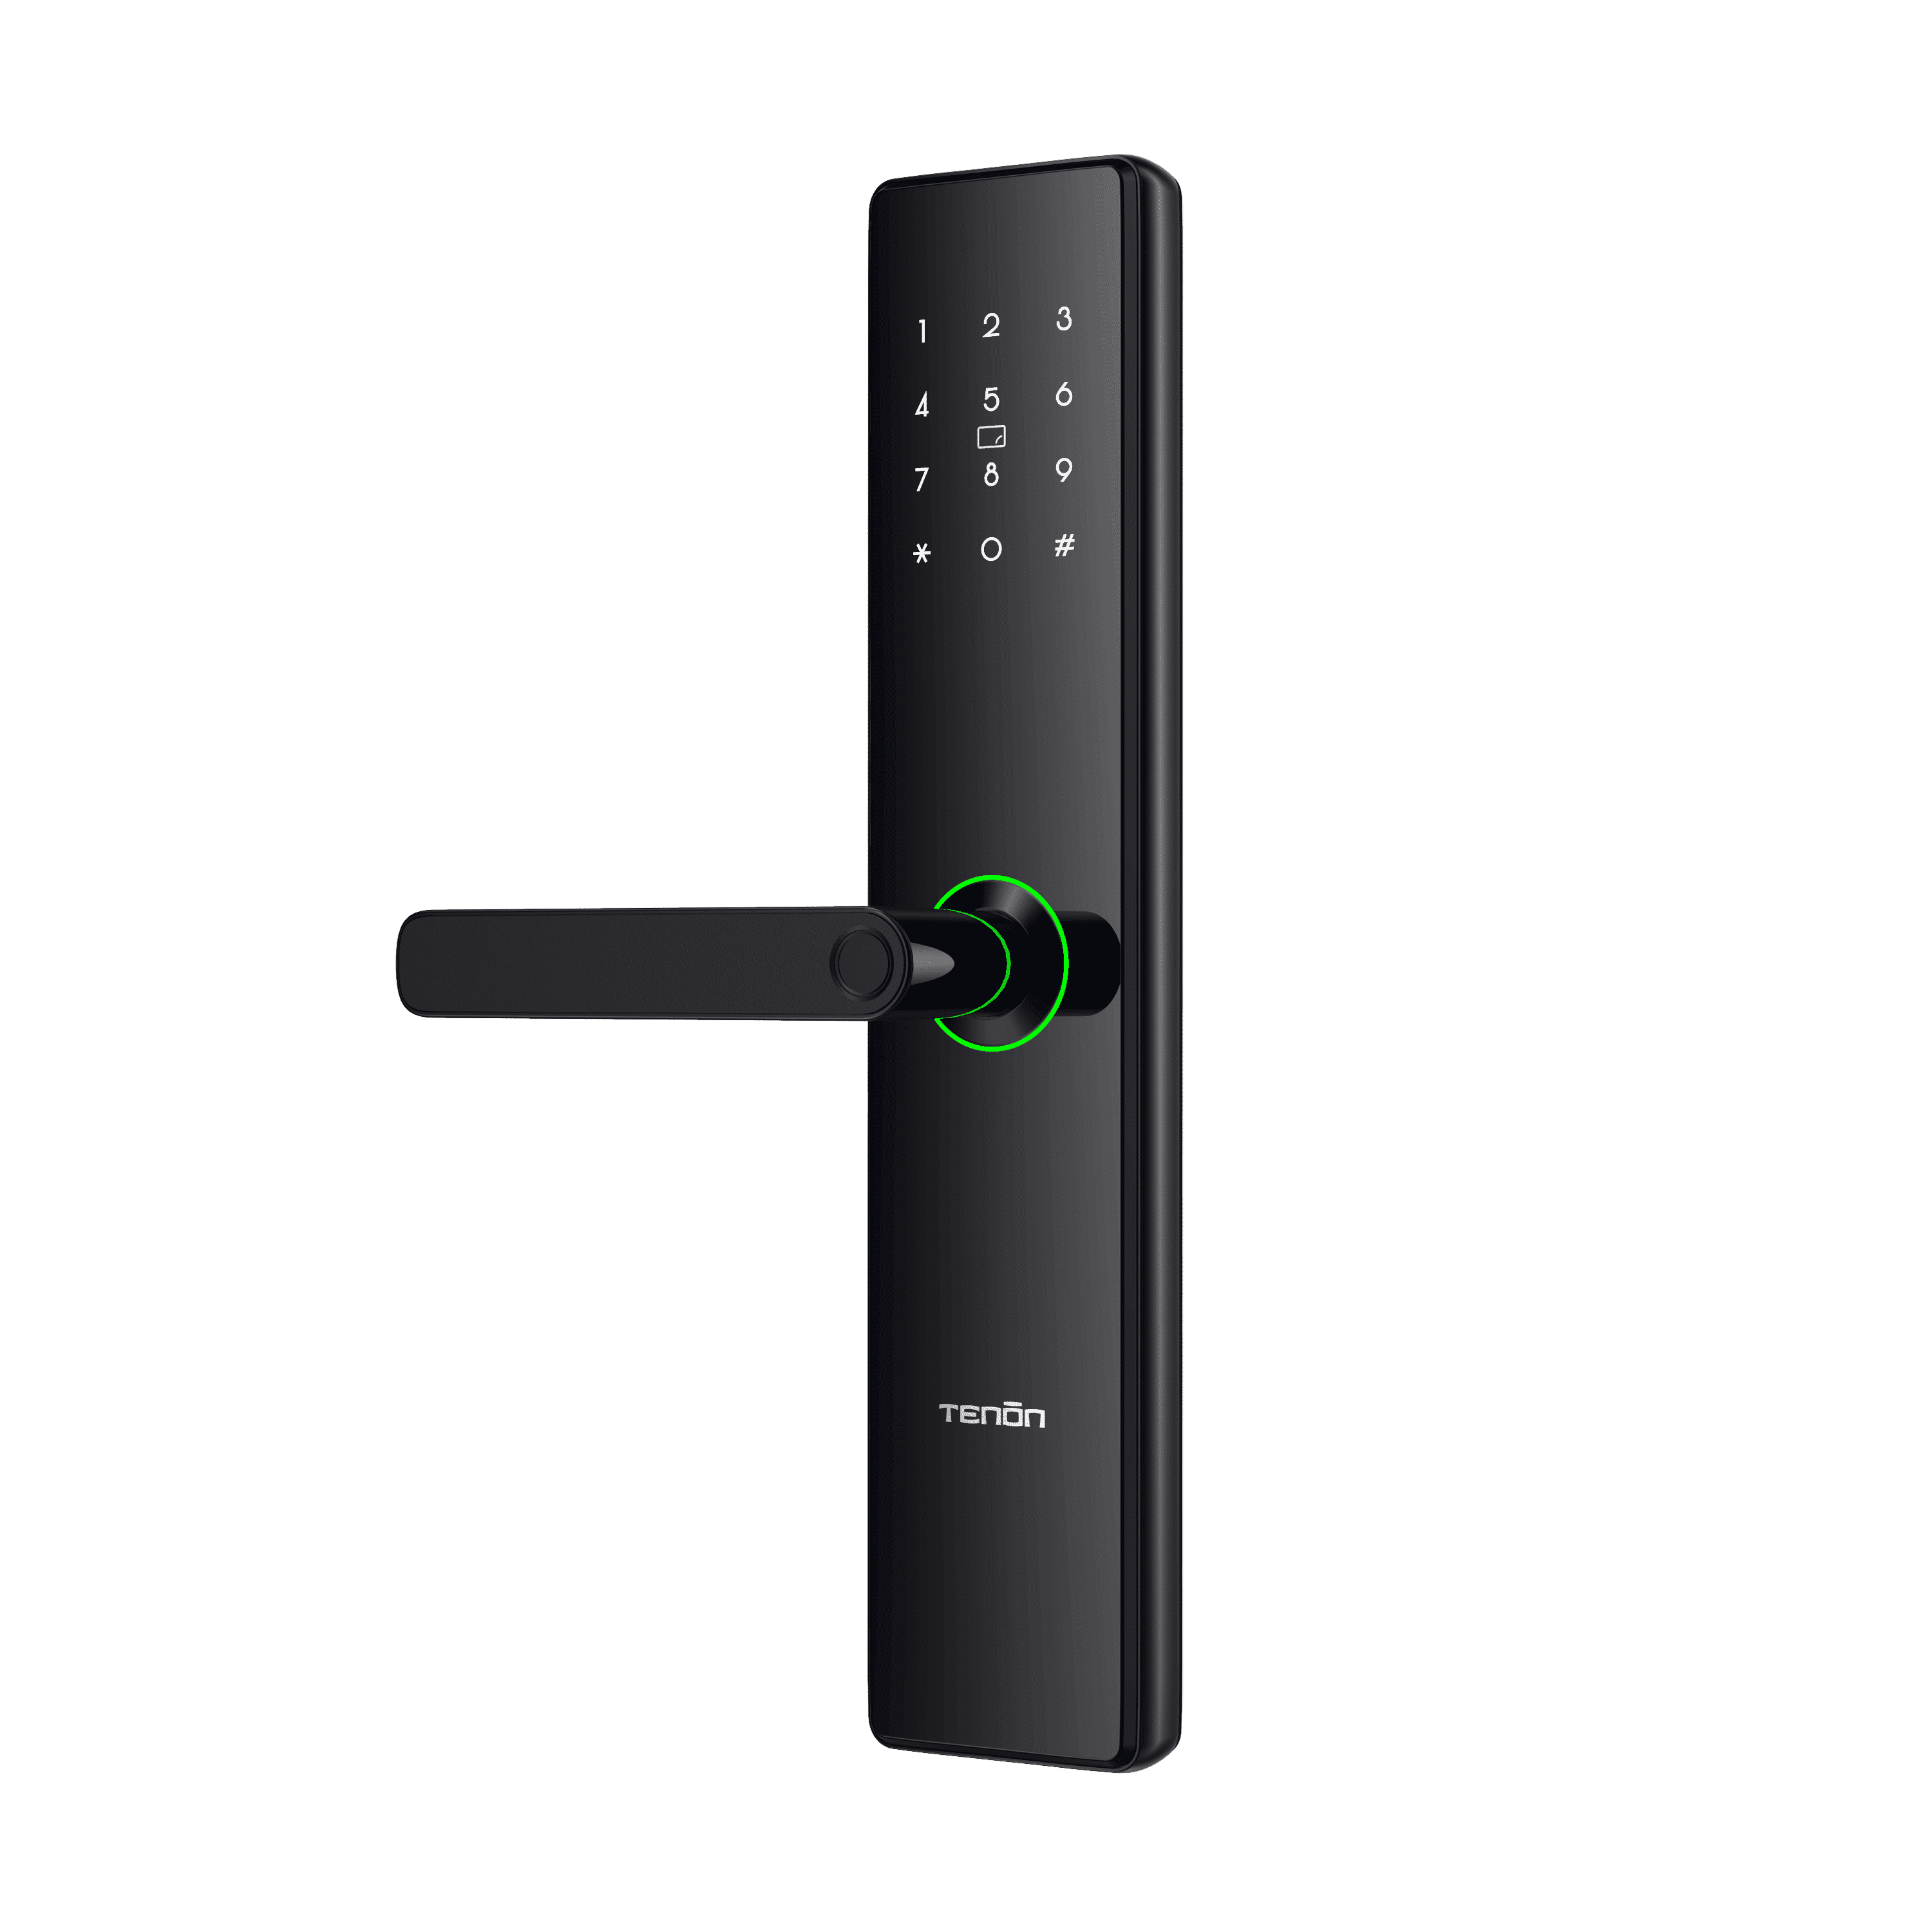 Remote Access Smart Touchpad Enabled Smart Lock